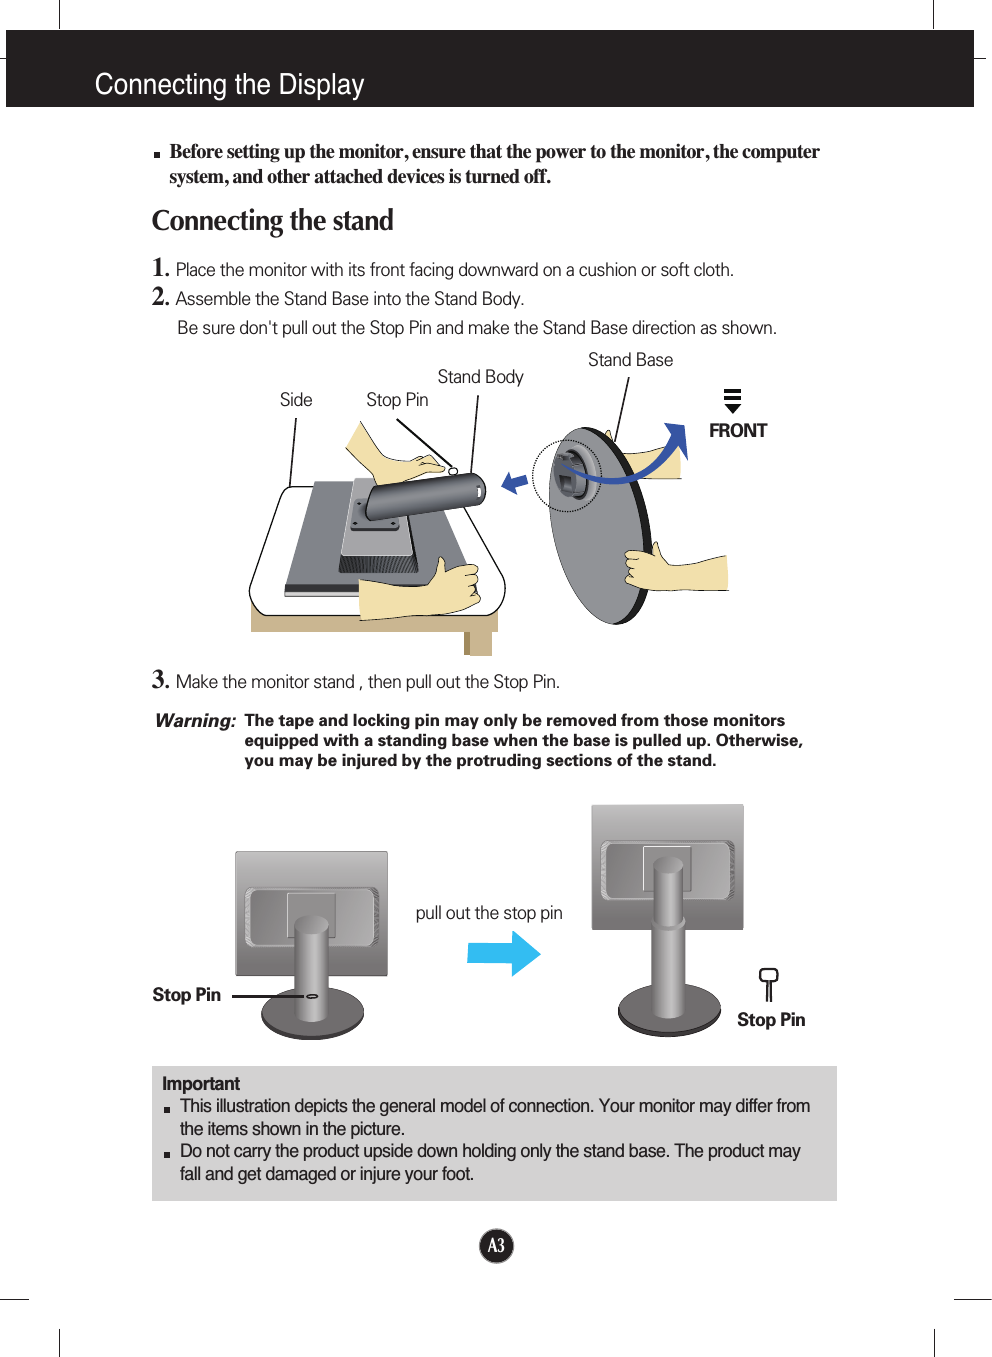 A3Connecting the DisplayImportantThis illustration depicts the general model of connection. Your monitor may differ fromthe items shown in the picture.Do not carry the product upside down holding only the stand base. The product mayfall and get damaged or injure your foot.Before setting up the monitor, ensure that the power to the monitor, the computersystem, and other attached devices is turned off.Connecting the stand 1.  Place the monitor with its front facing downward on a cushion or soft cloth.2.Assemble the Stand Base into the Stand Body.Be sure don&apos;t pull out the Stop Pin and make the Stand Base direction as shown. 3.Make the monitor stand , then pull out the Stop Pin.Stand BaseFRONTStand BodyStop PinSideStop PinStop Pinpull out the stop pinThe tape and locking pin may only be removed from those monitorsequipped with a standing base when the base is pulled up. Otherwise,you may be injured by the protruding sections of the stand.Warning: